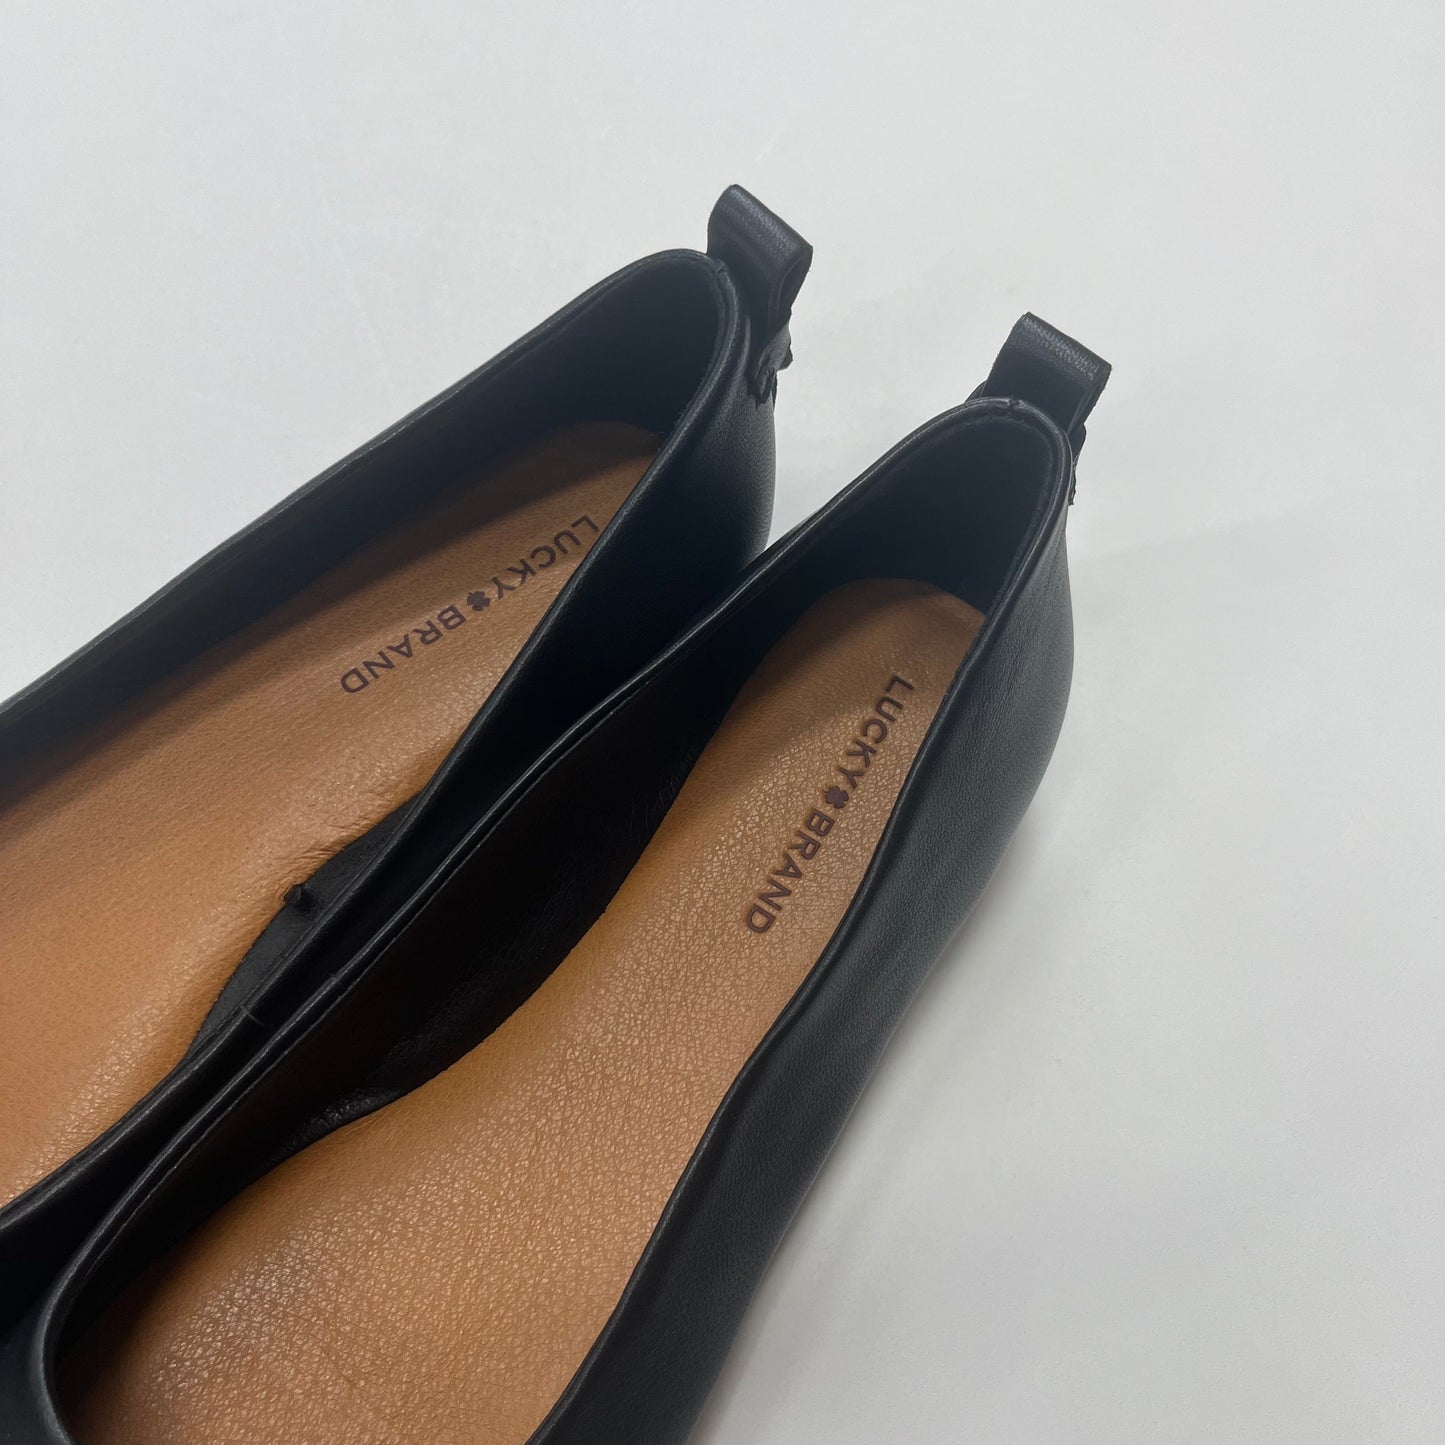 Black Shoes Flats Ballet Lucky Brand, Size 8